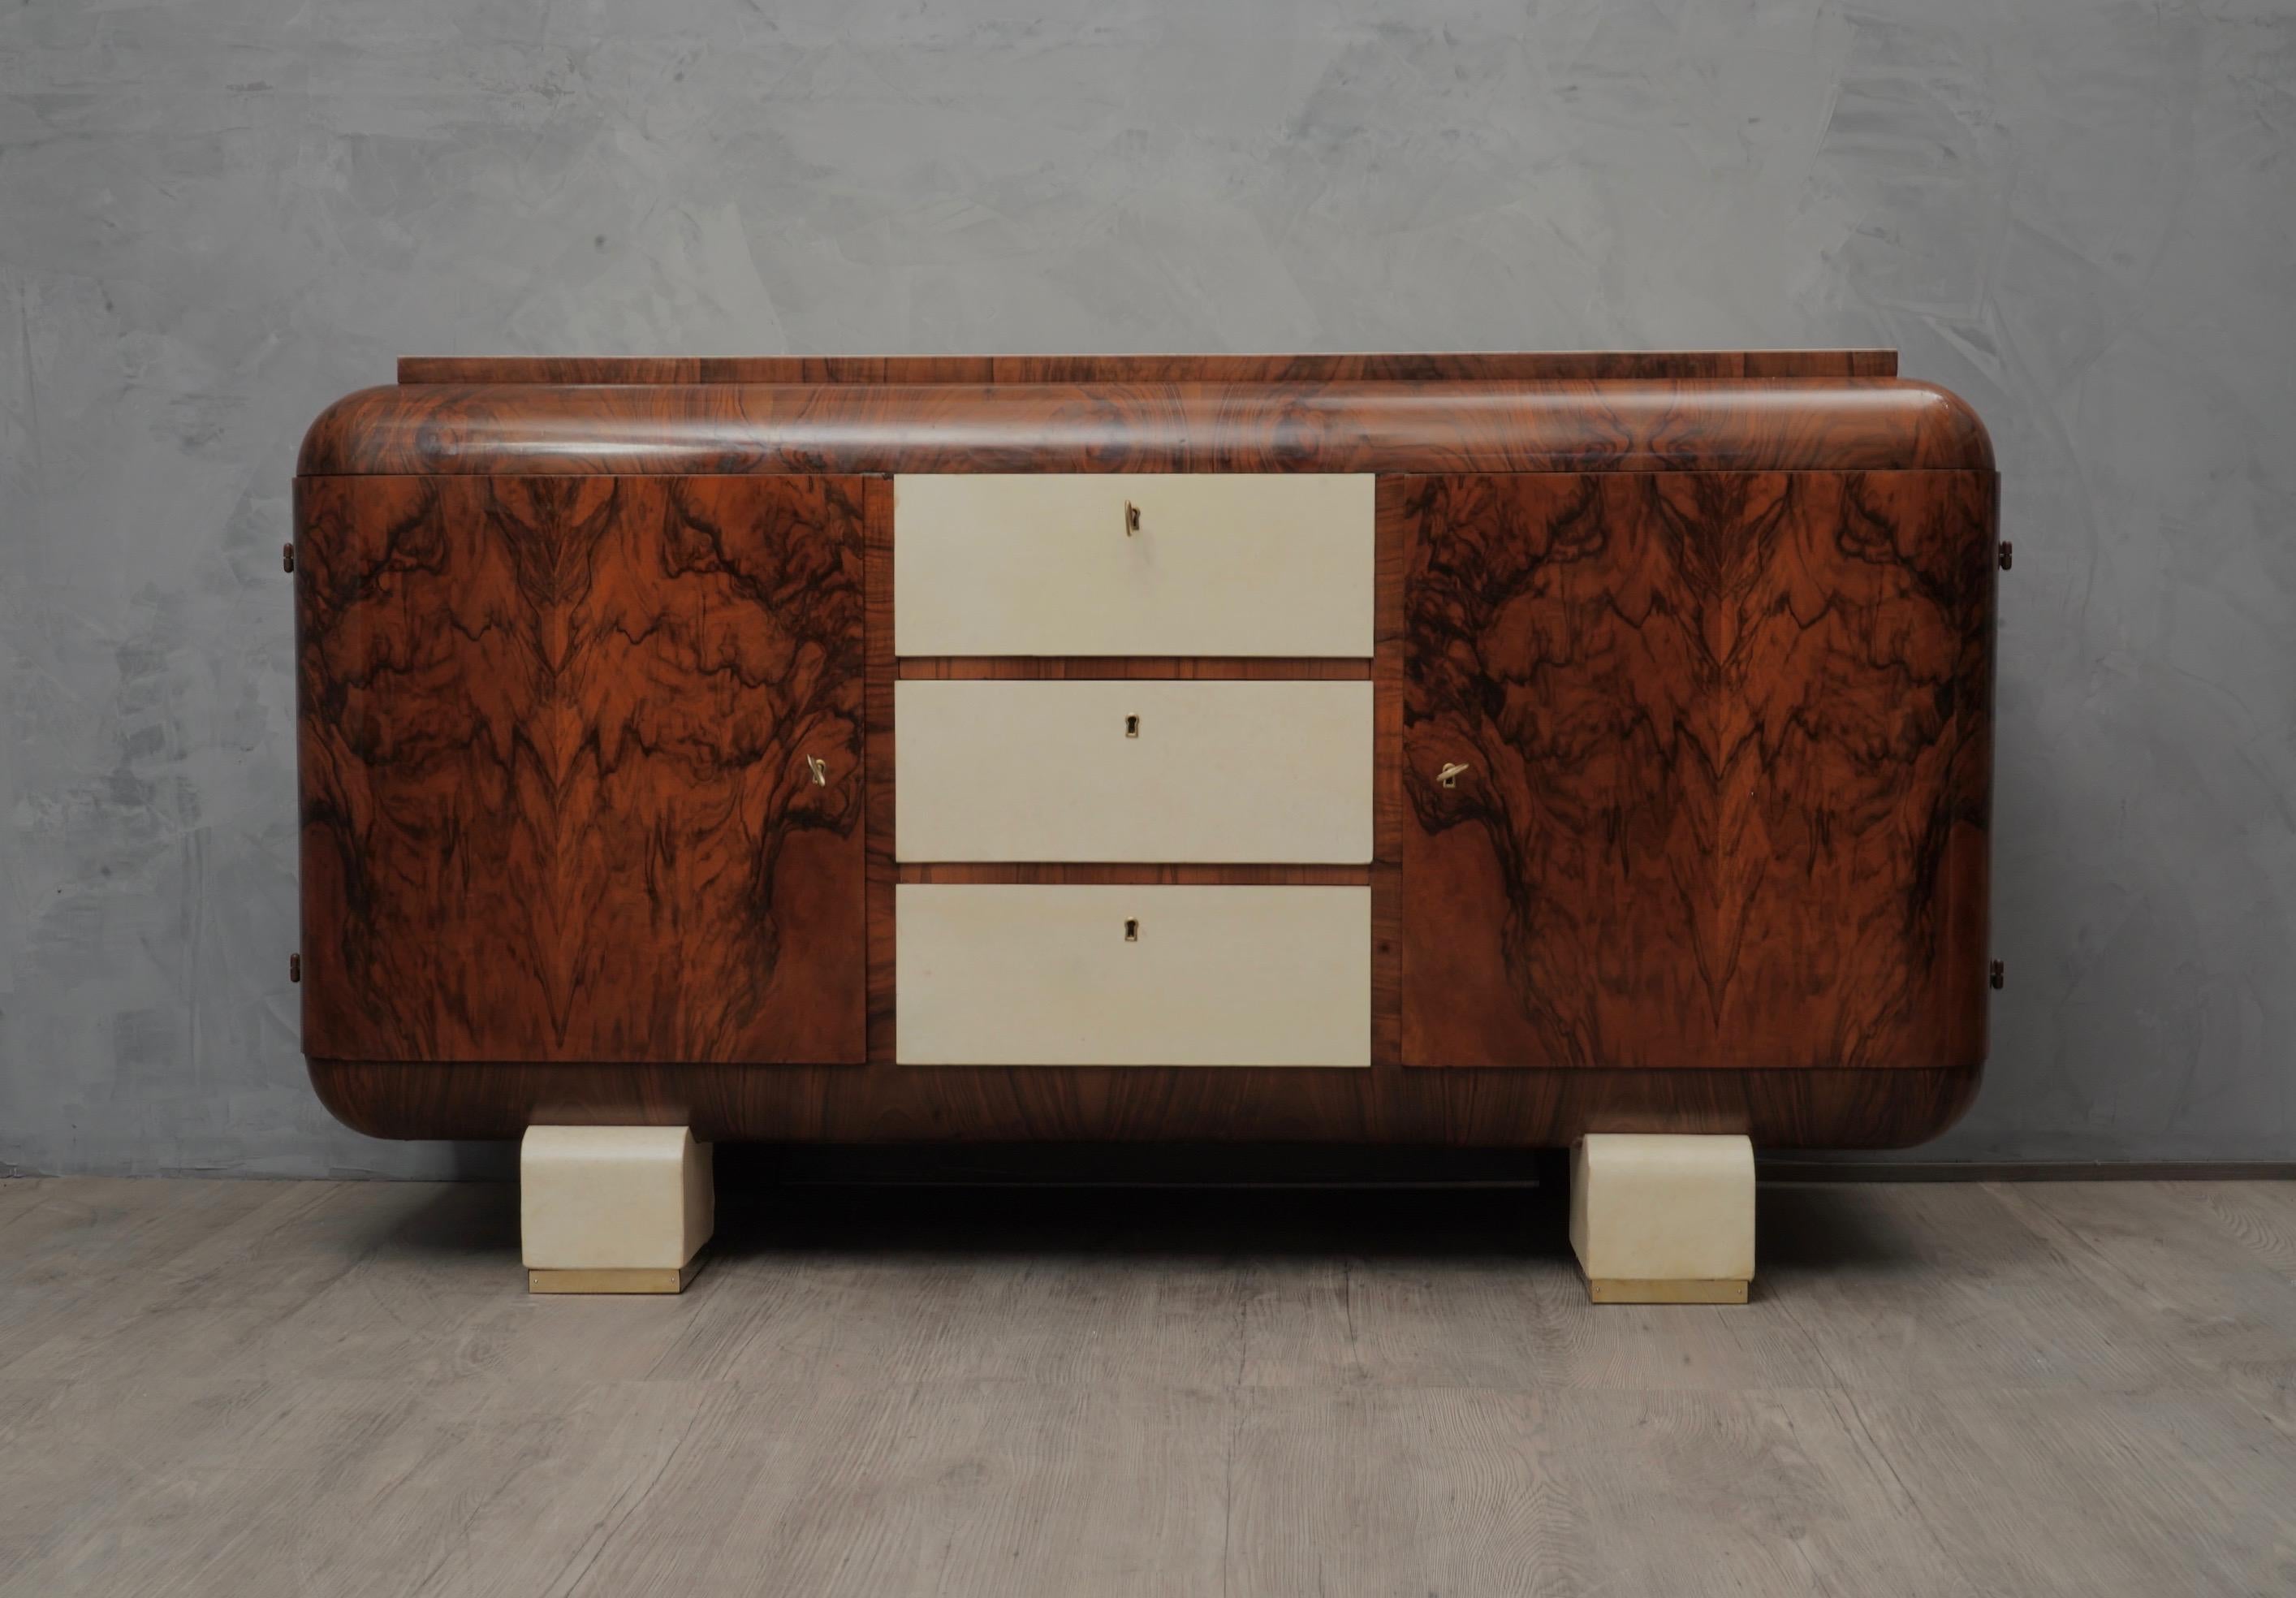 Elegant art deco sideboard where a subtle all over patina emphasizes the grain of the walnut wood, enriched with a fantastic goat skin on the front and top.

The sideboard is veneered in walnut root wood, with top and the front drawers covered in